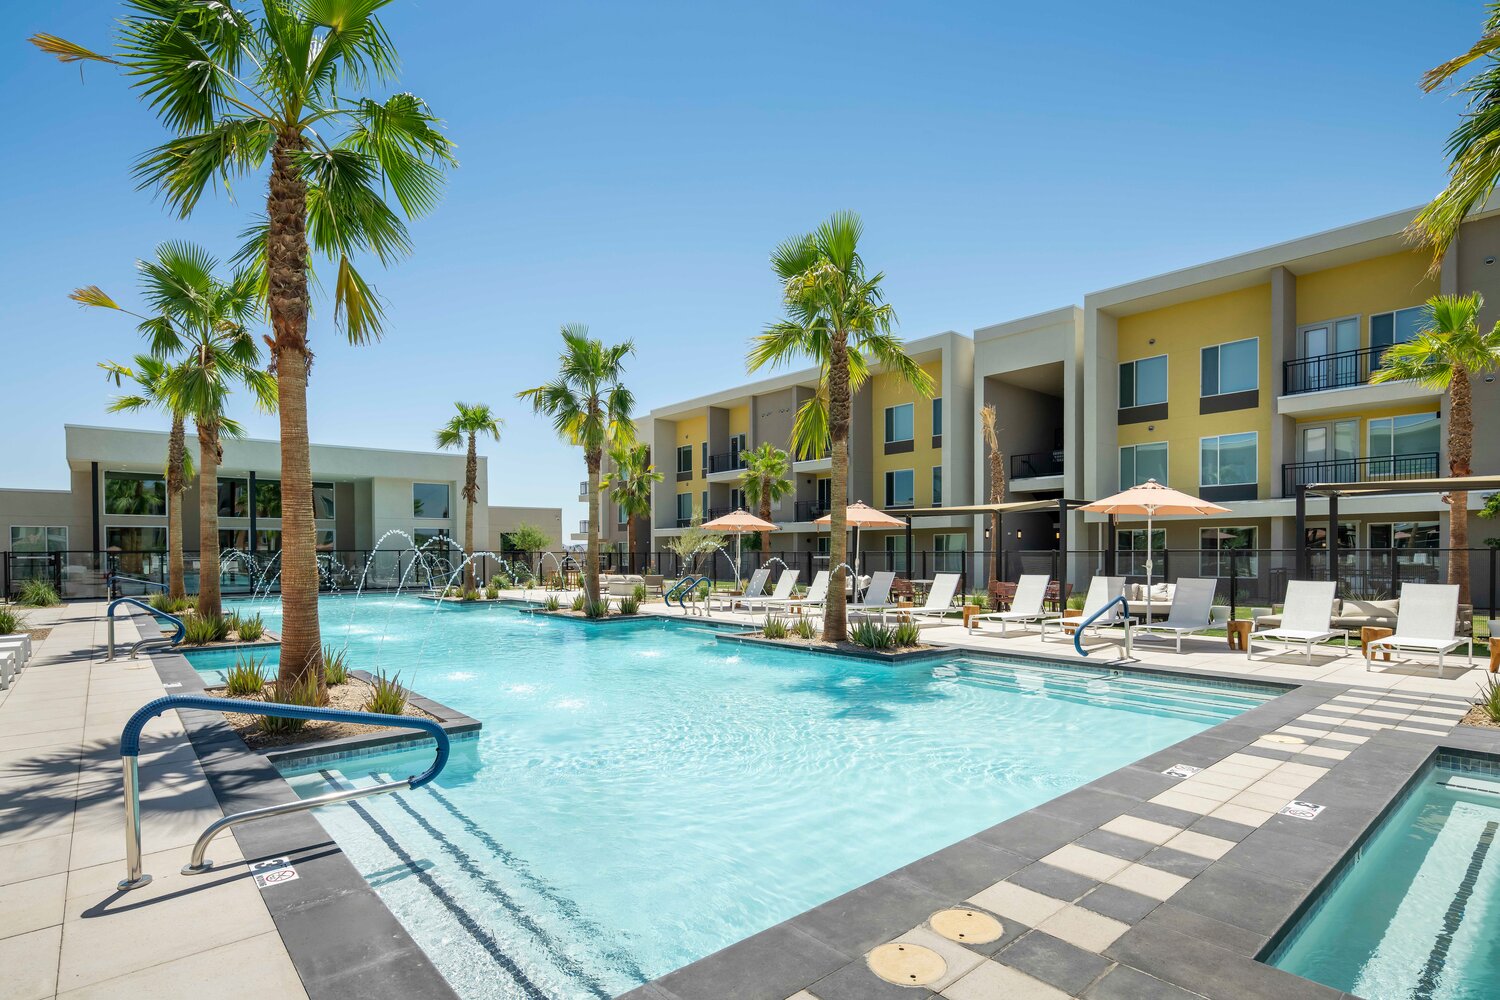 The Livano Deer Valley in North Phoenix offers 242 apartment units and amenities.